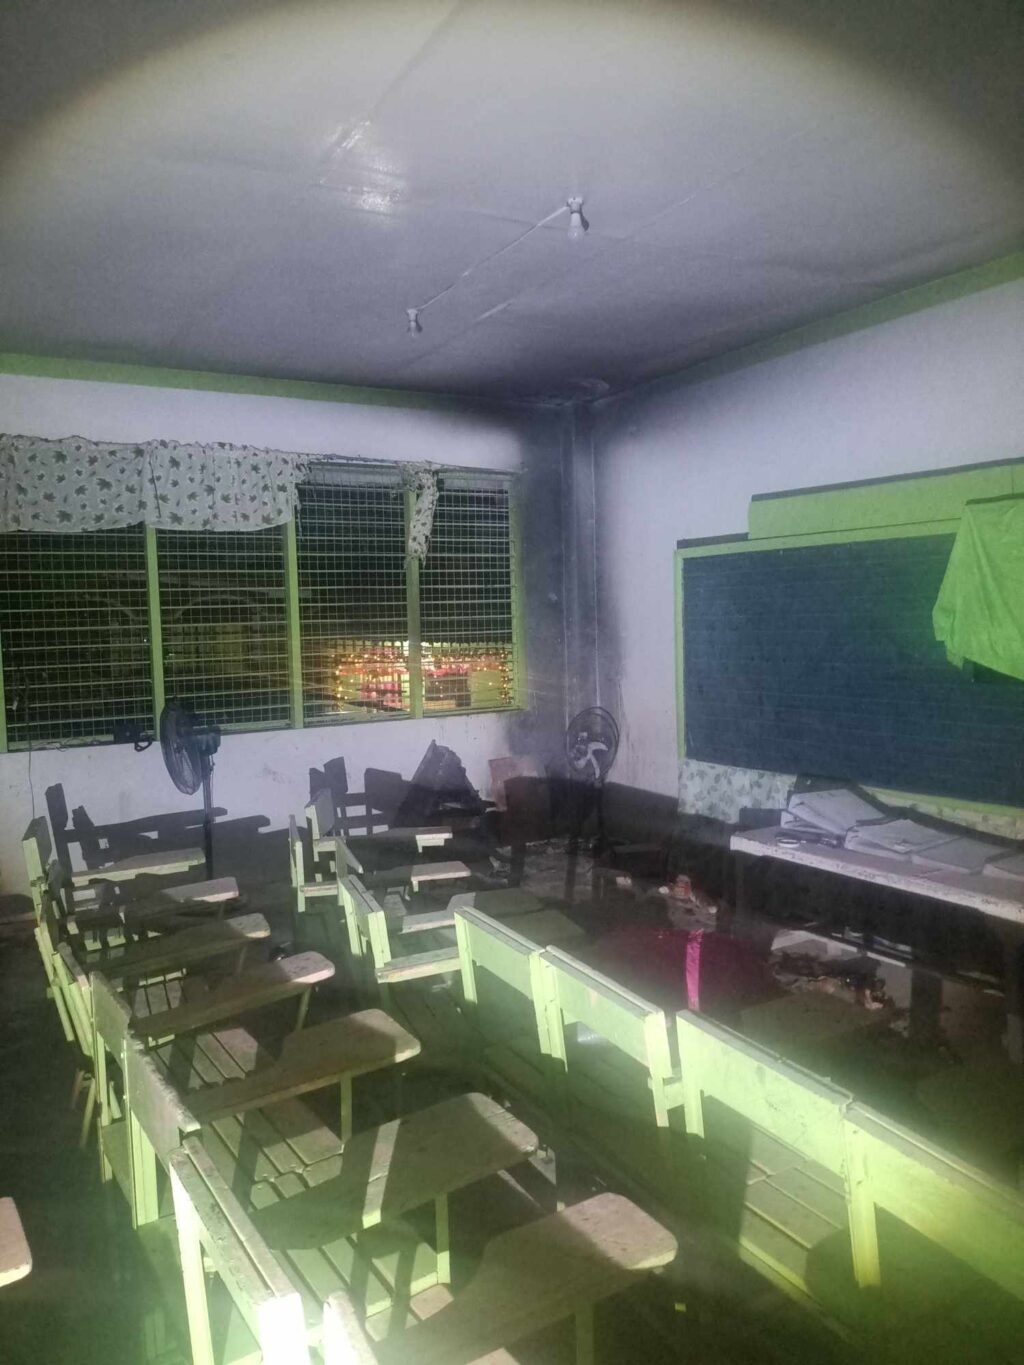 New Year's Day fires. A classroom from Pasil Elementary School got partially burned after a firecracker landed inside the classroom. | GMA Super Radyo via Futch Anthony Inso